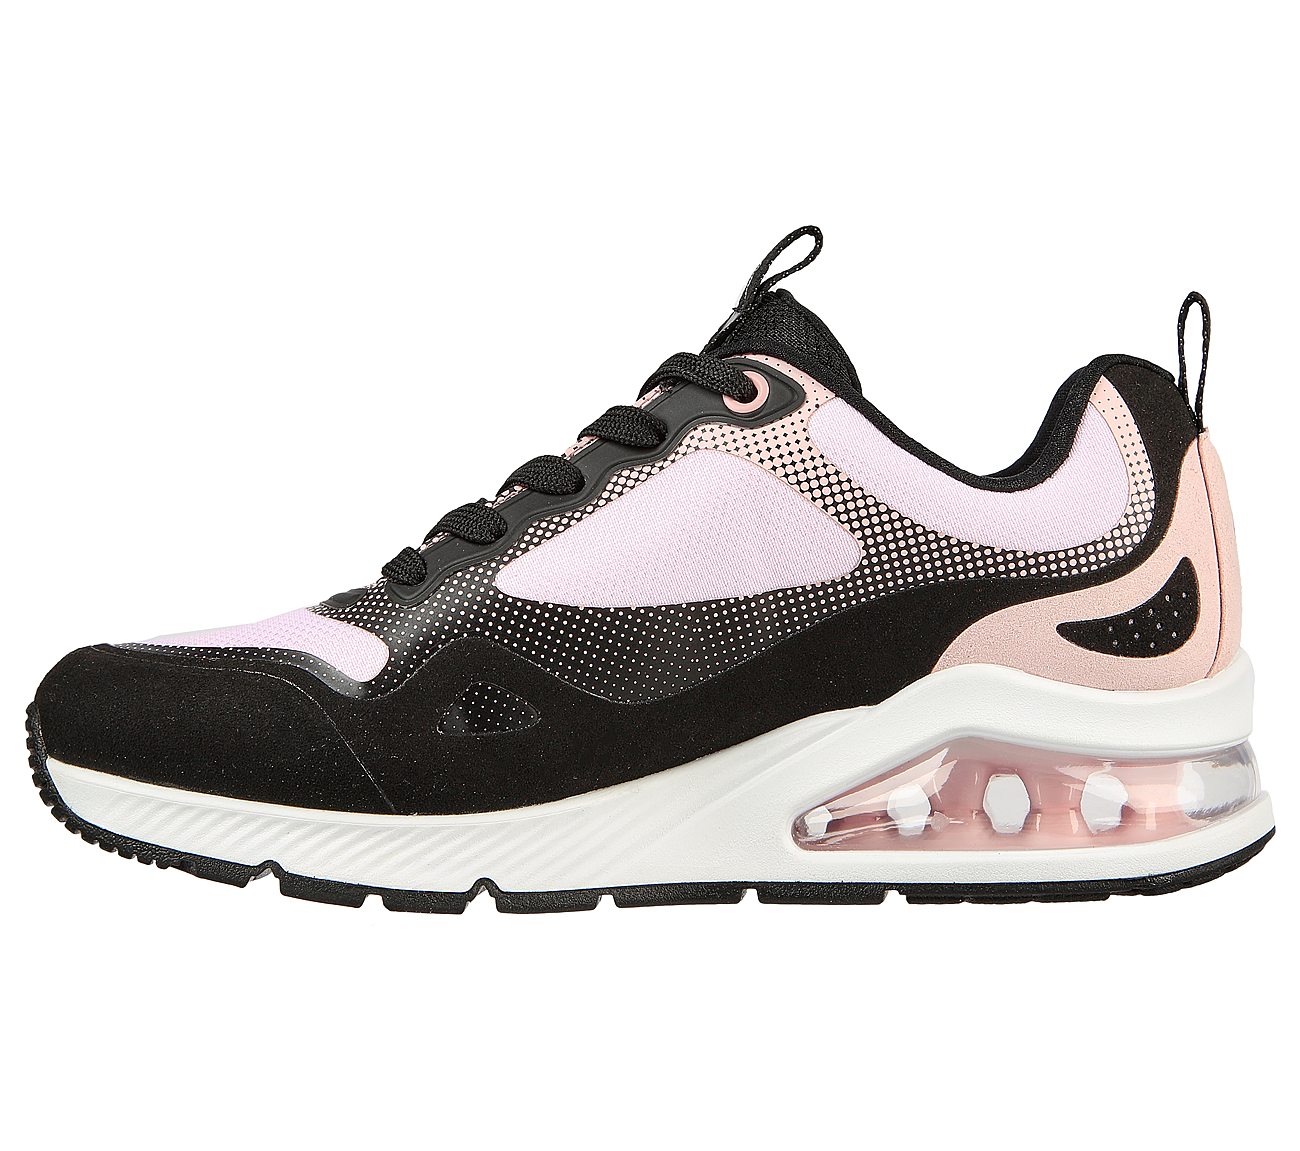 UNO 2 - MAD AIR, BLACK/LIGHT PINK Footwear Left View